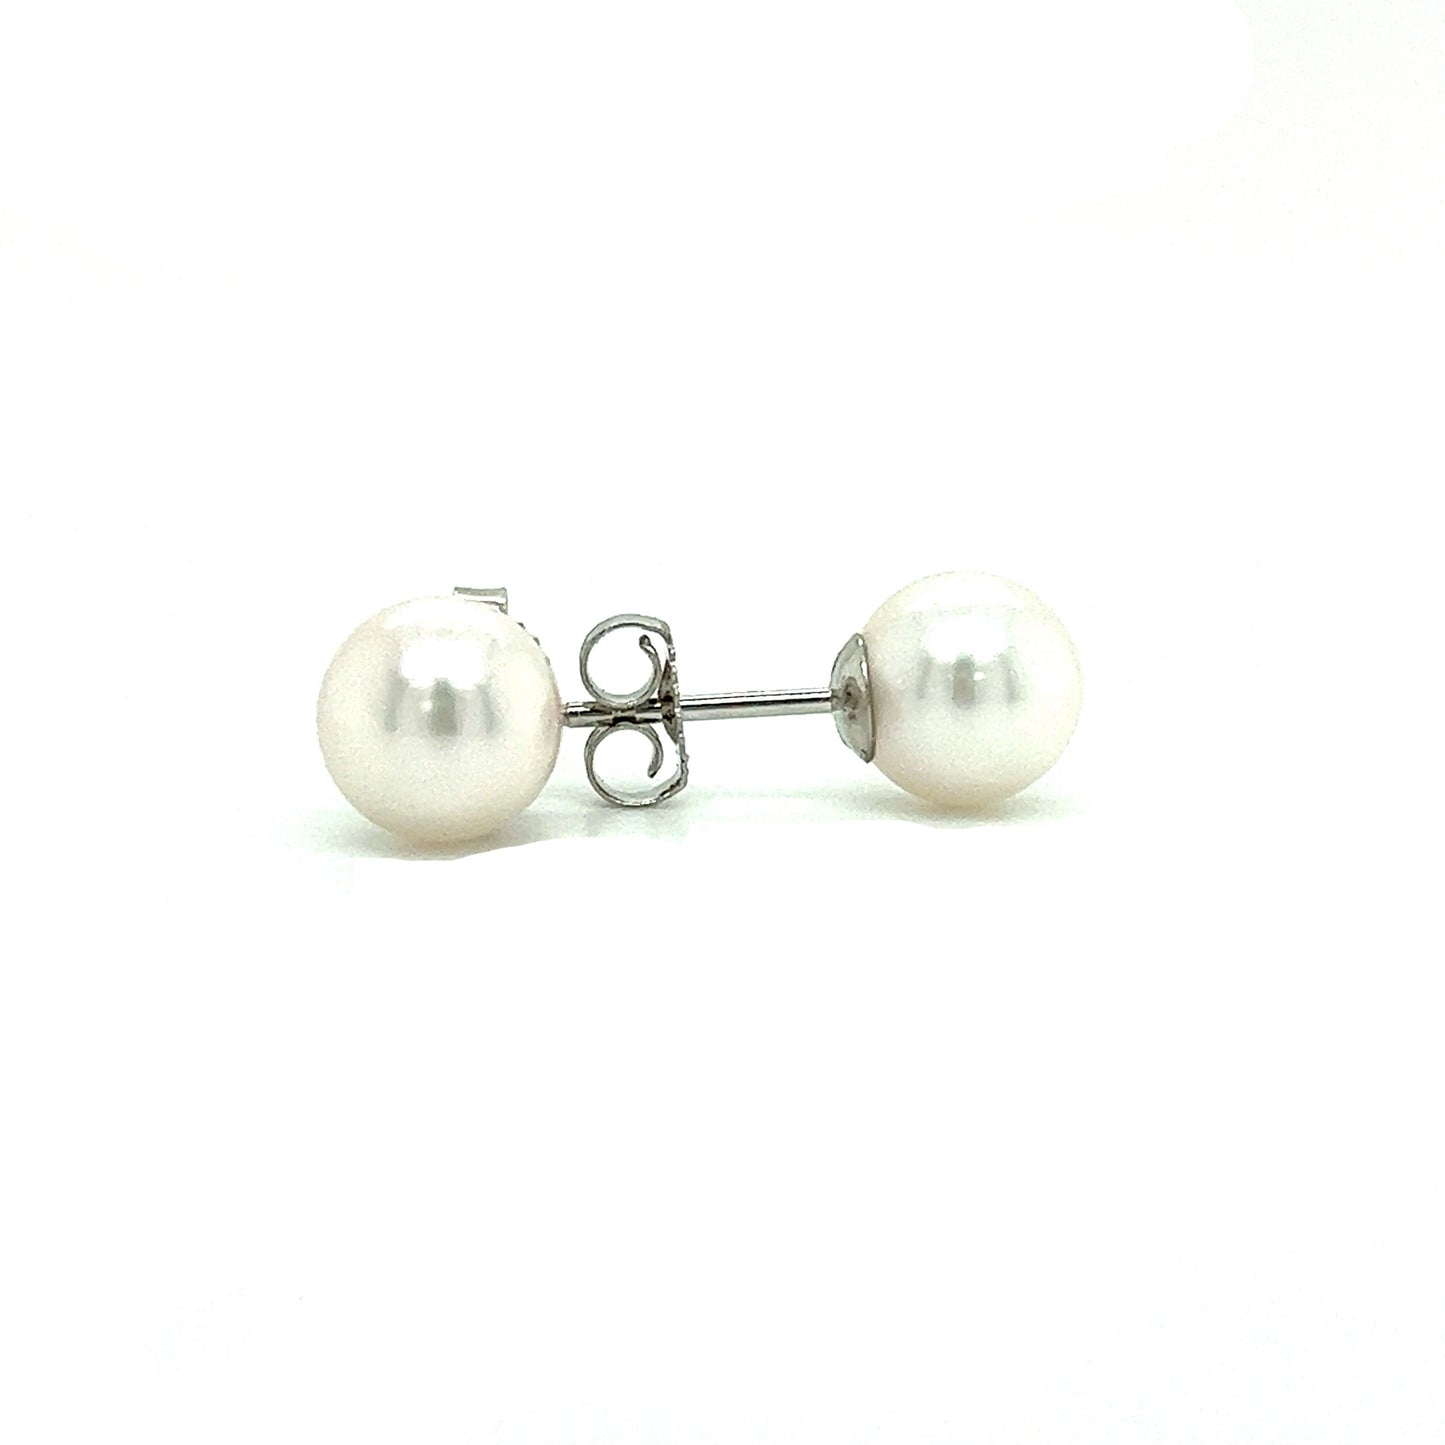 Pearl 6.5mm Stud Earrings in 14K White Gold Front and Side View